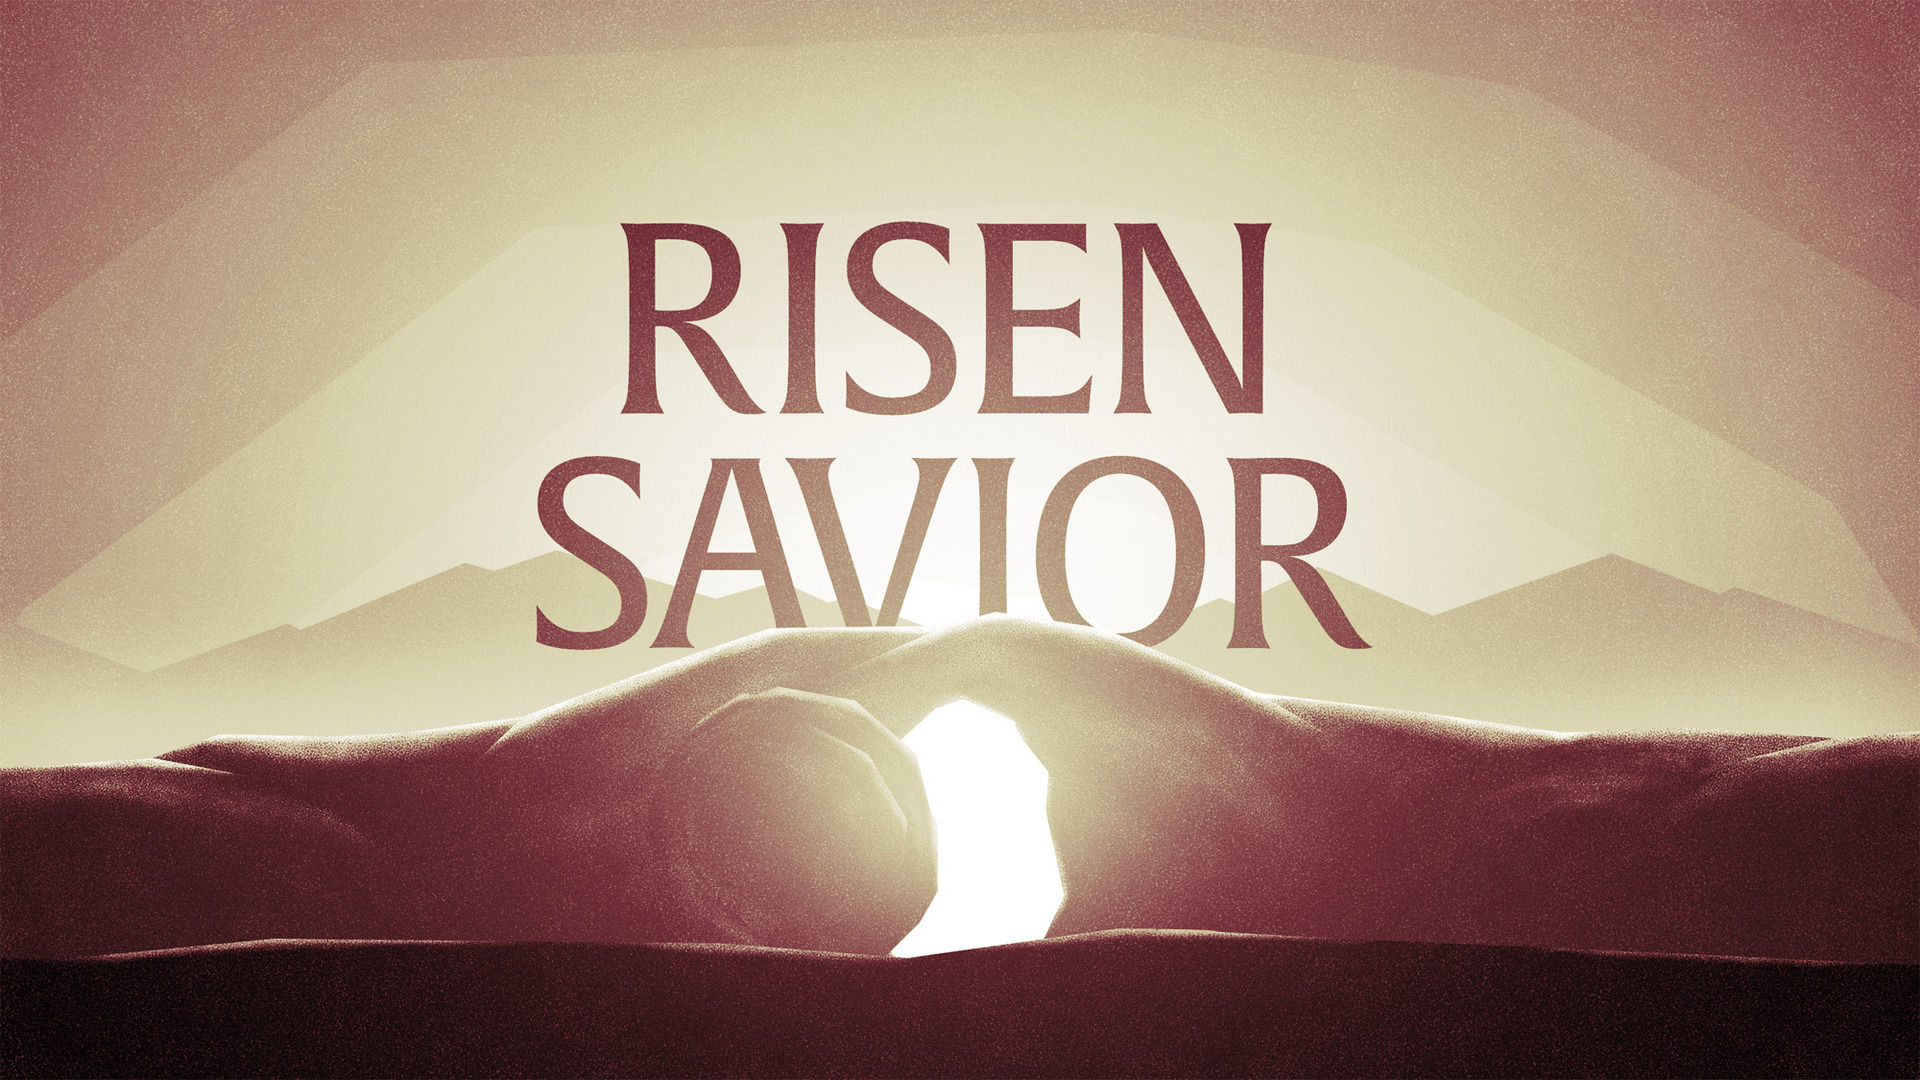 Picture of empty tomb with stone rolled away and the words 'Risen Savior' super-imposed.